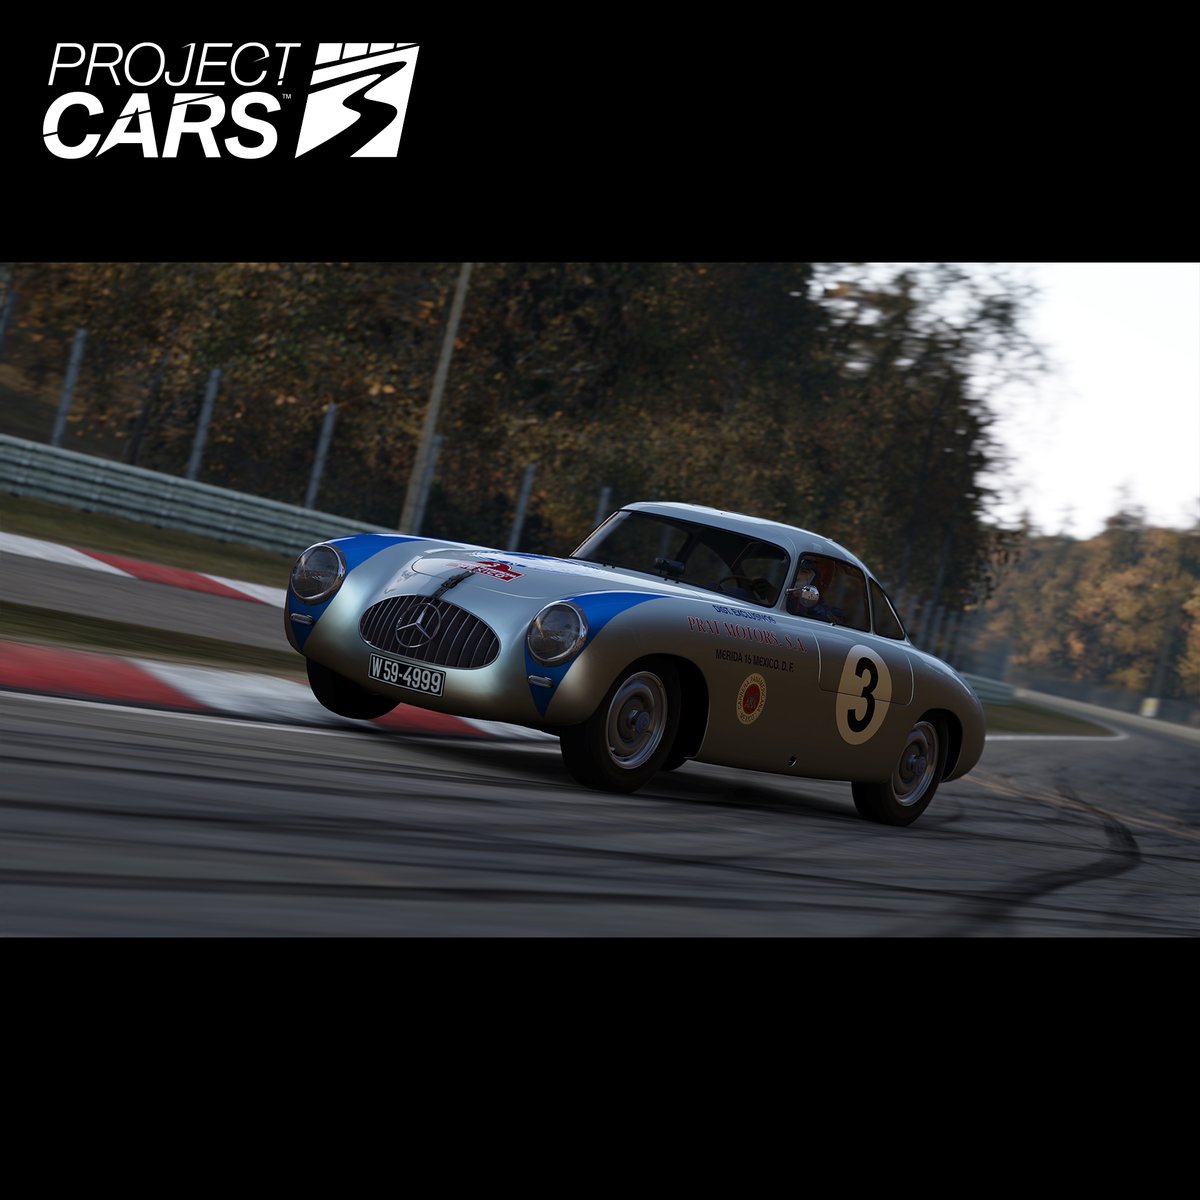 Ready for some racing vintage? #ProjectCARS3 • #ProjectCARS